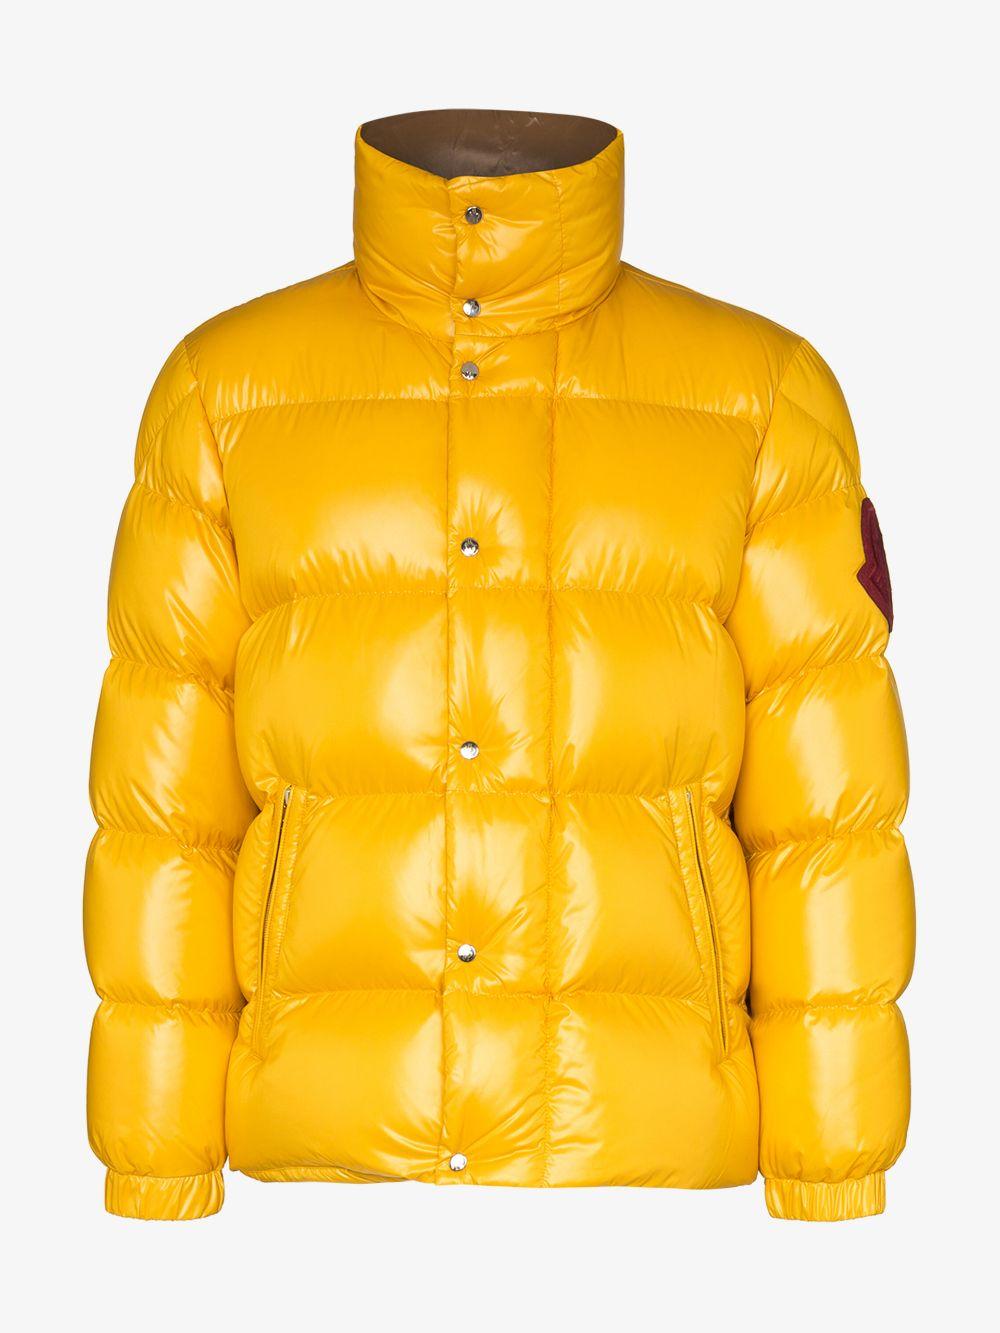 Moncler Genius Devaux Padded Puffer Jacket in Yellow for Men - Lyst